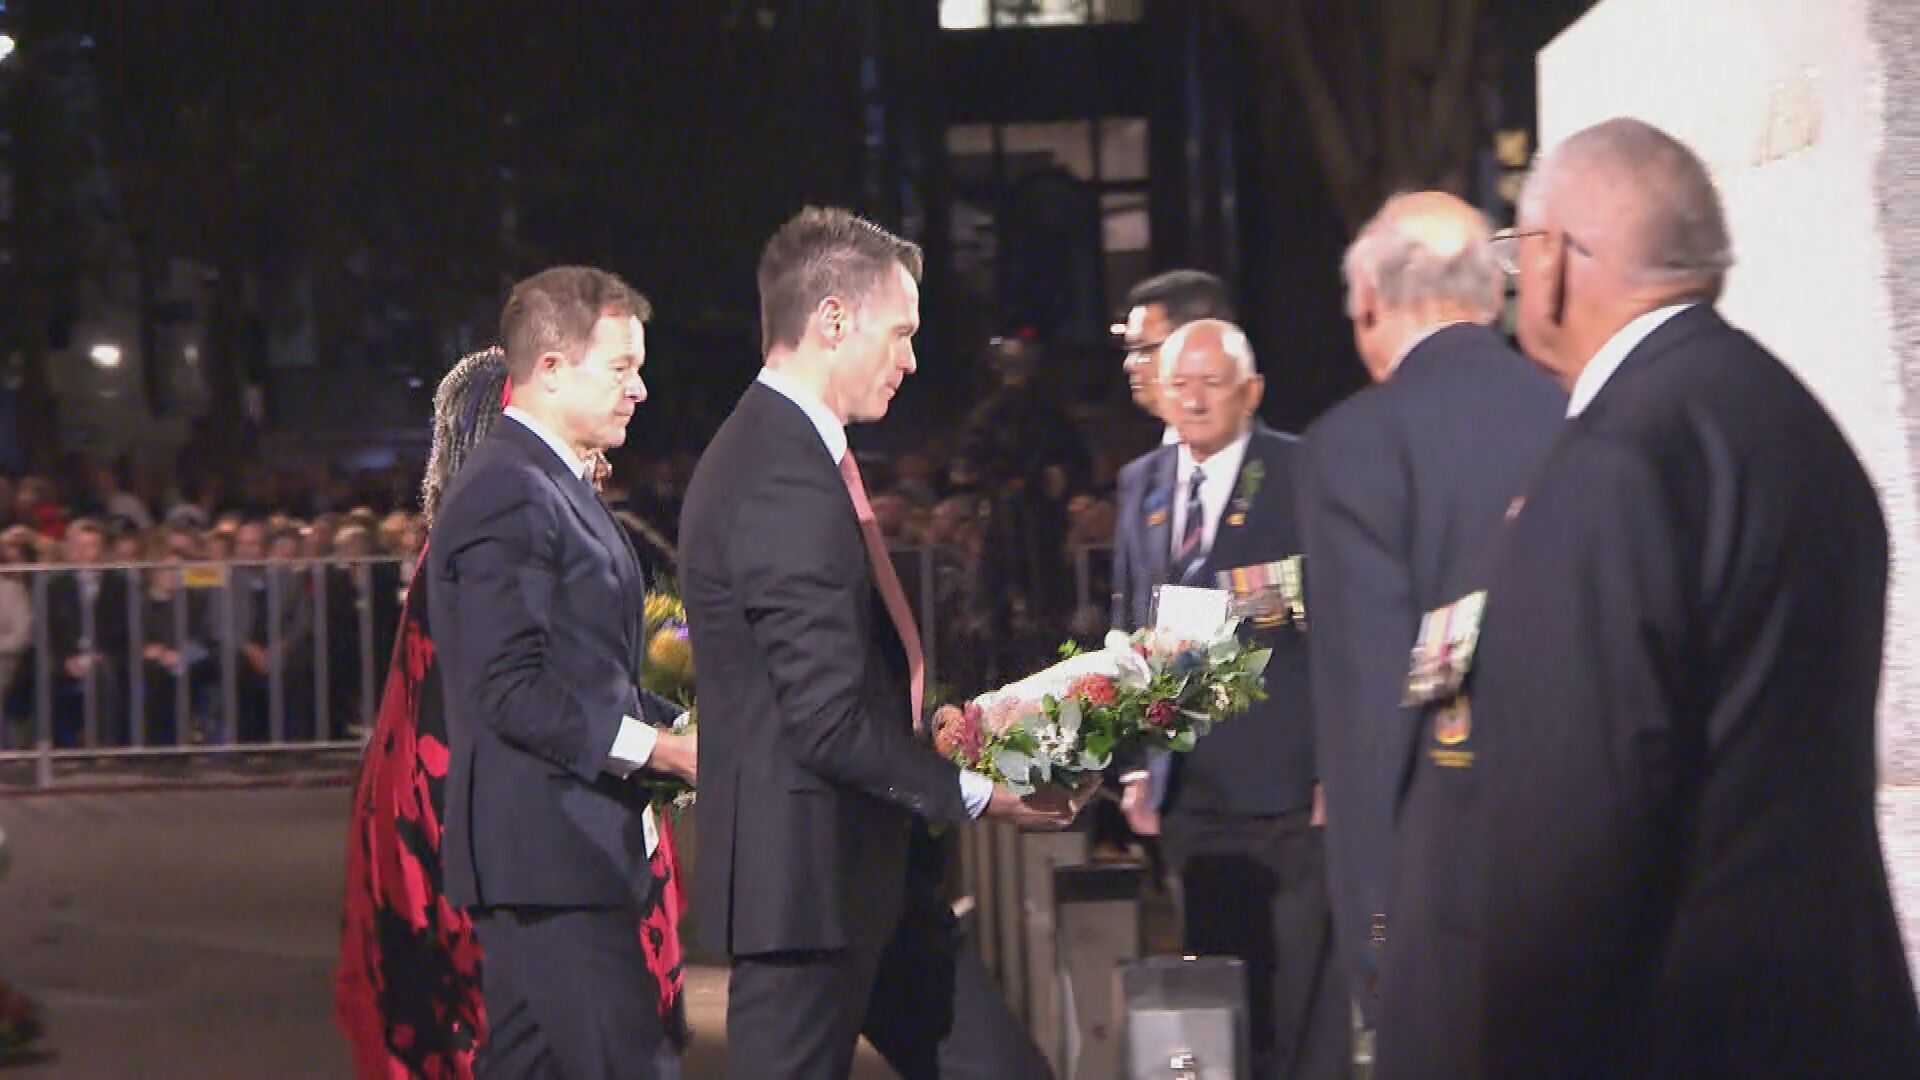 NSW Premier Chris Minns lays wreath at cenotaph in Martin Place, Sydney during Anzac Day dawn service